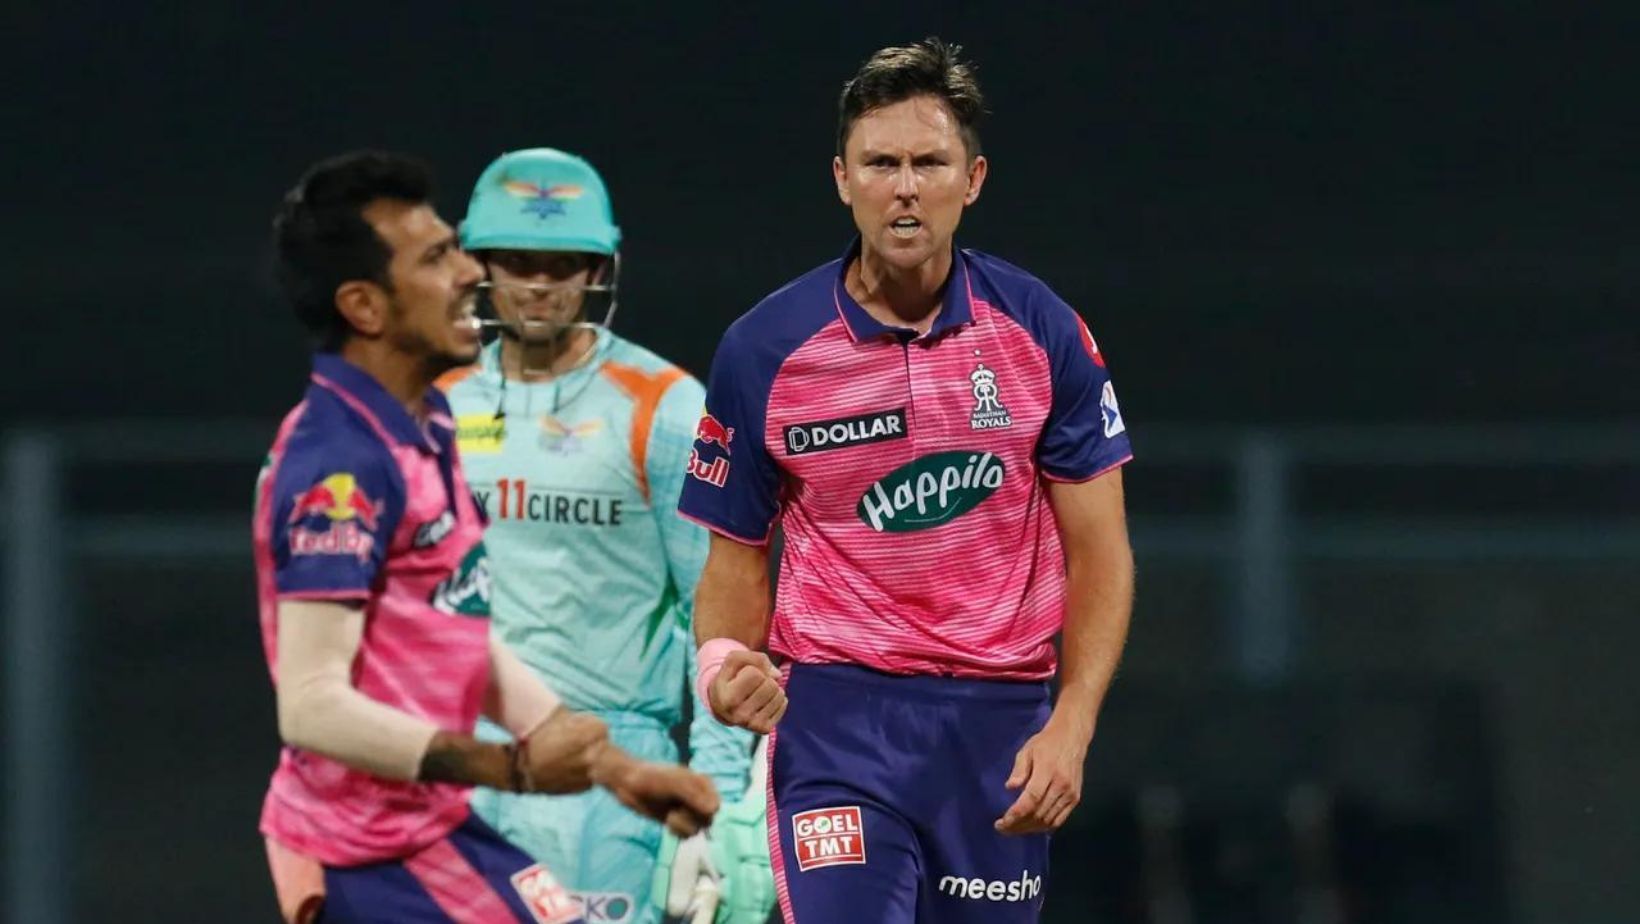 Trent Boult (R) celebrates after taking a wicket vs Lucknow Super Giants.